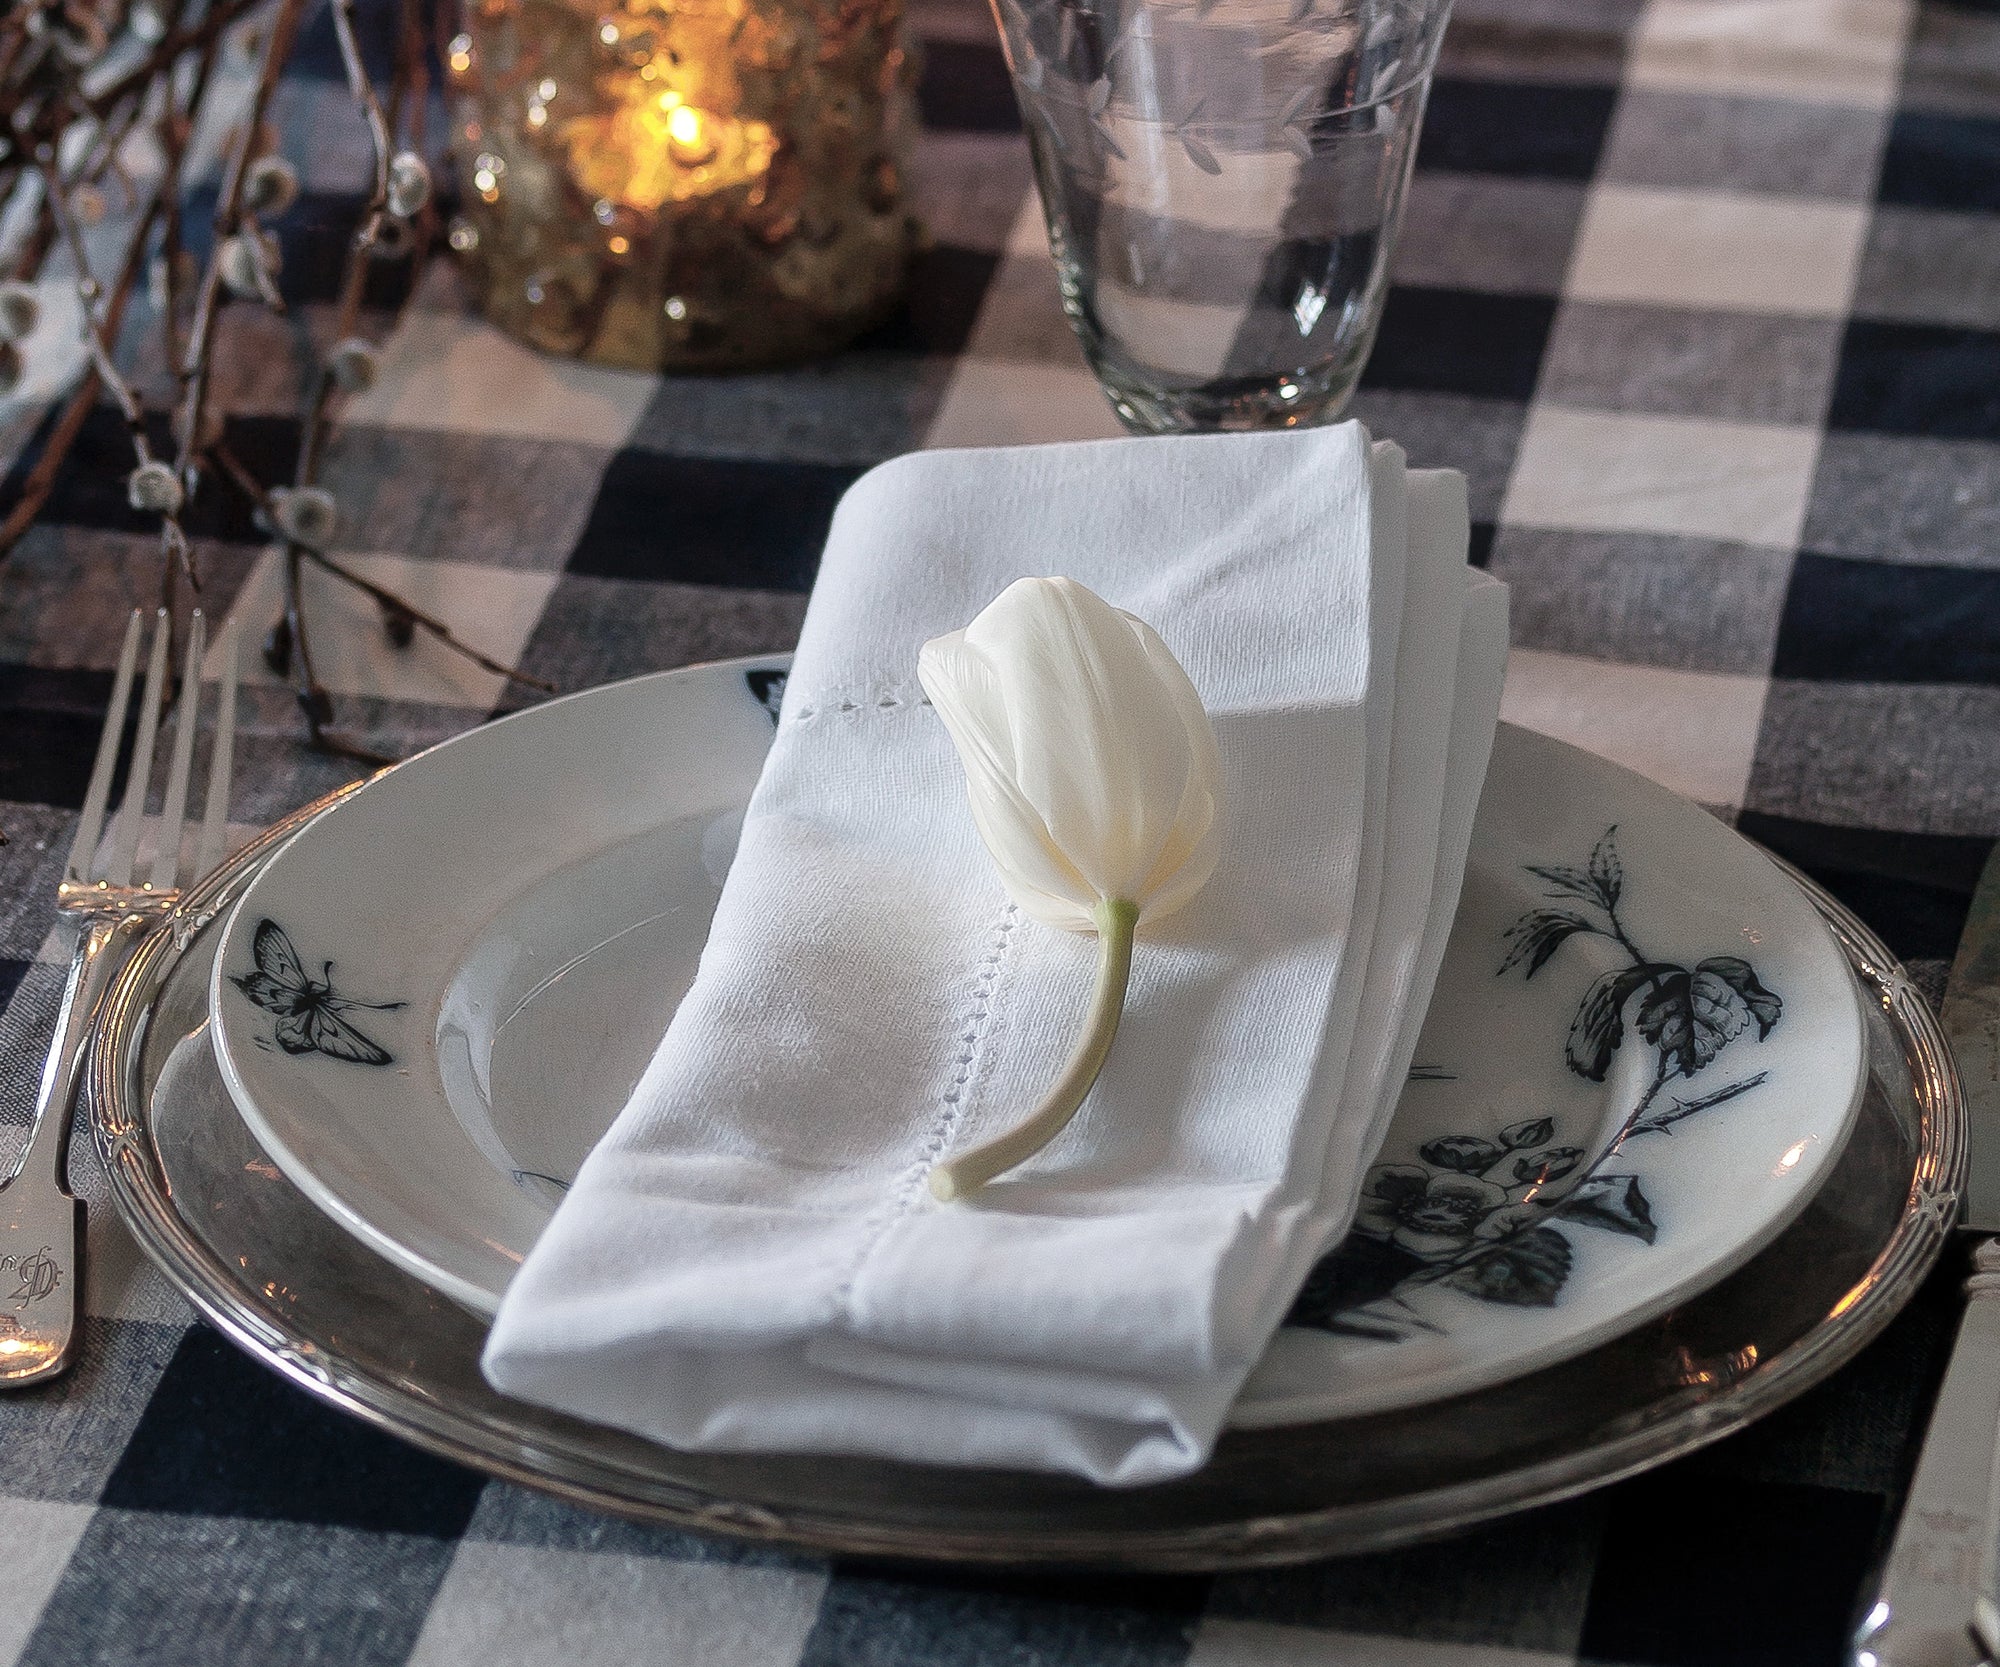 Napkin Holder vs. Napkin Rings: Which is better for Your Table Setting?